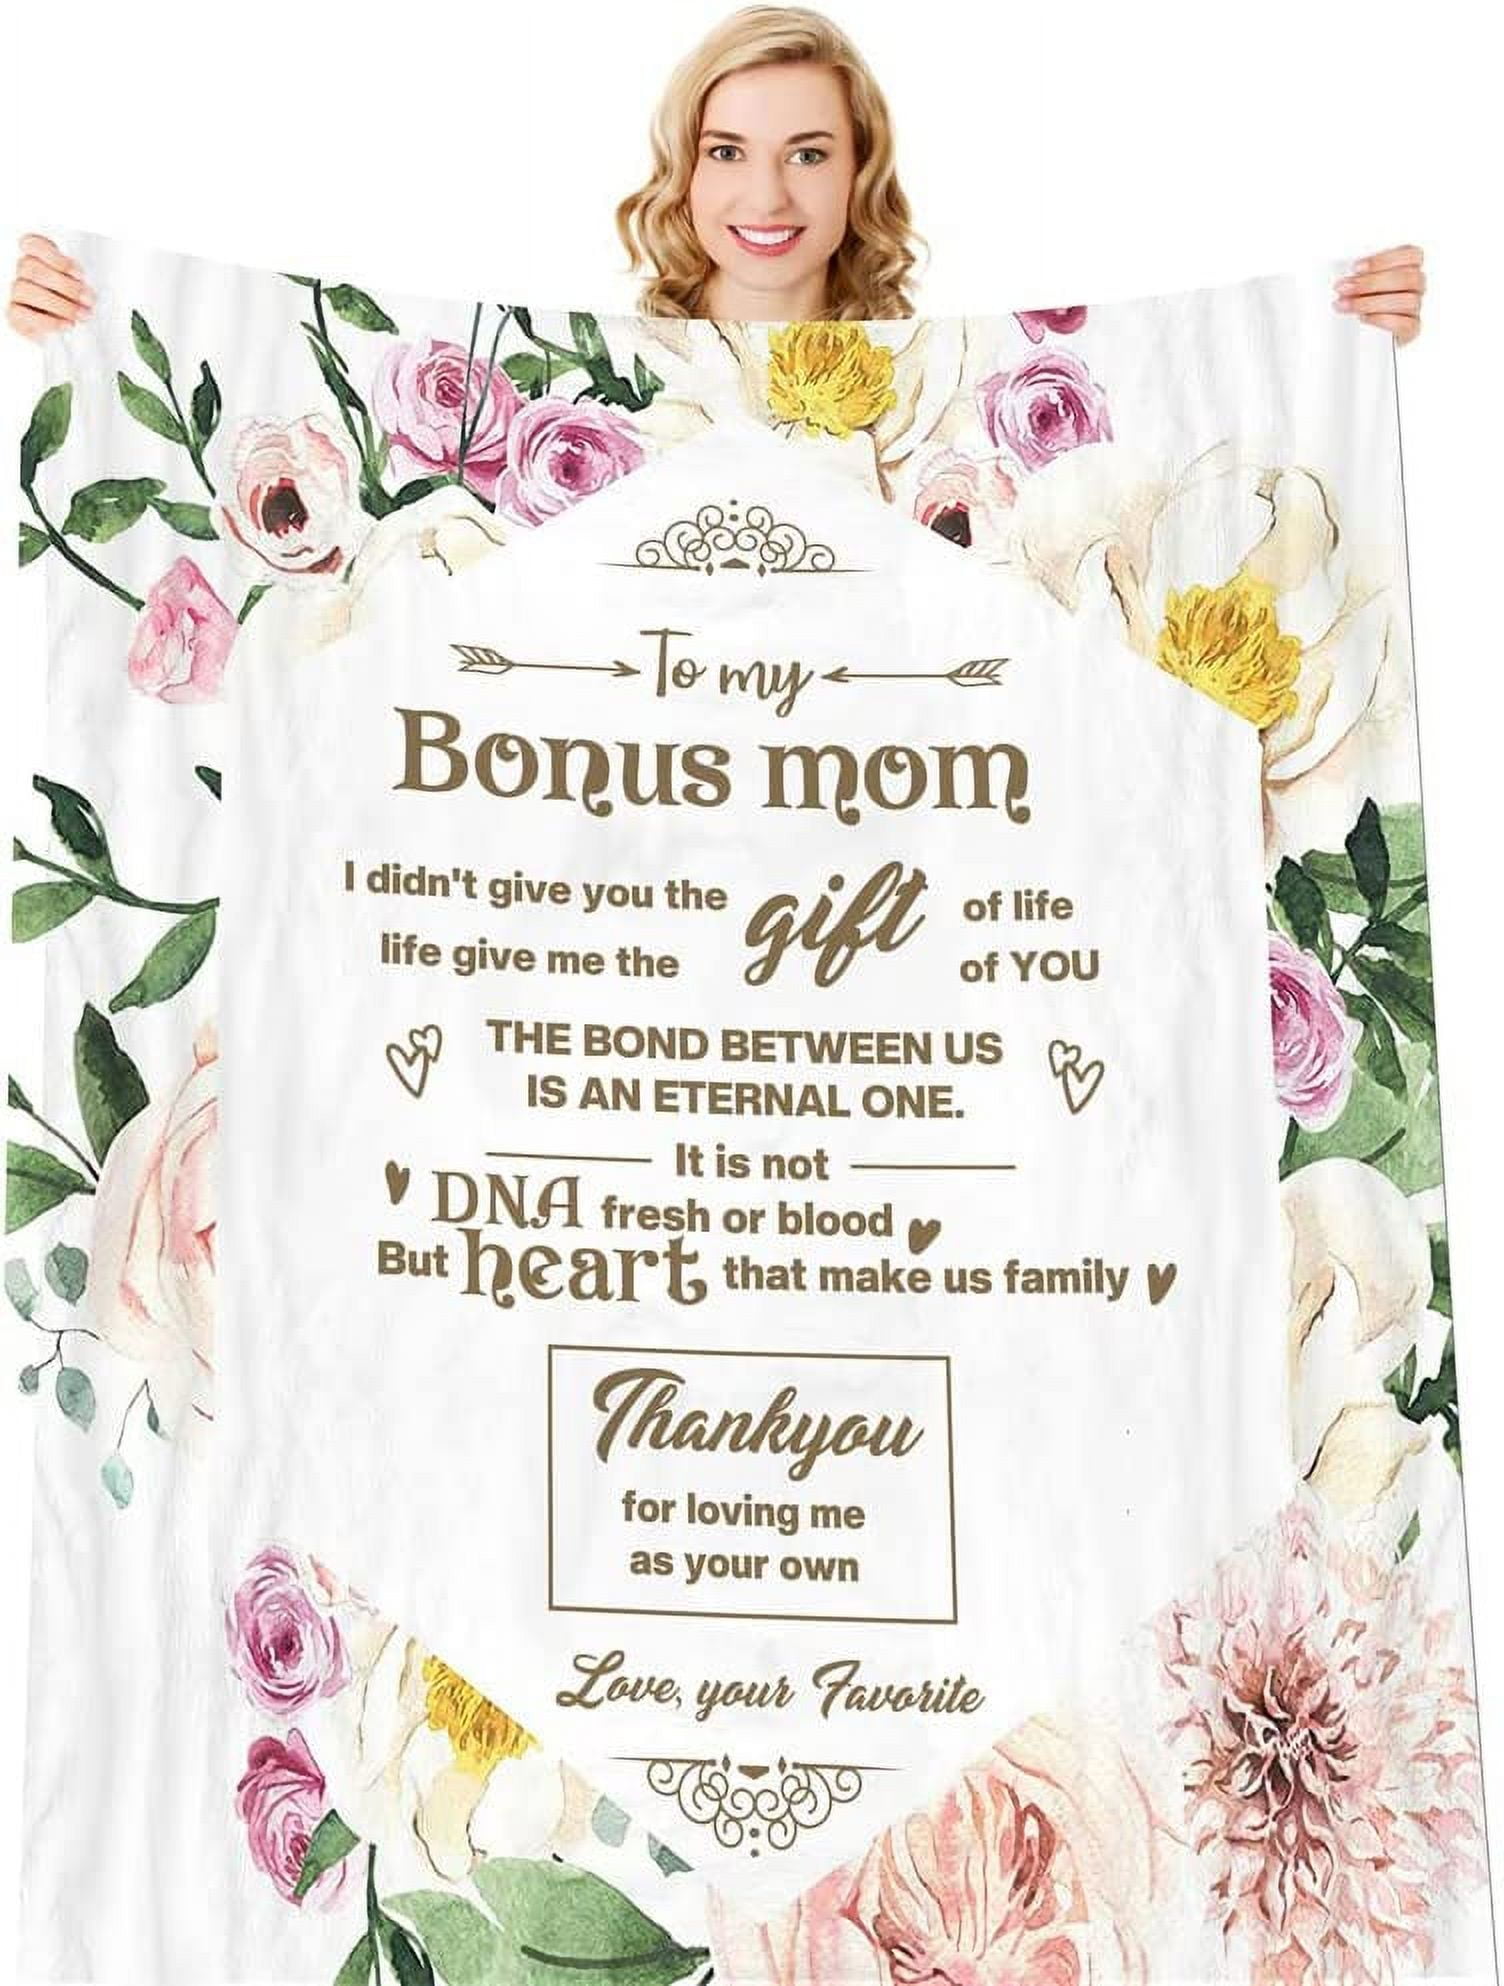 Gifts for Mom, Mothers Day Birthday Gifts for Mom, Mom Birthday Gifts, Mom  Gifts, for Mom, Mom Christmas Day Gifts, Mom Birthday Gifts from Daughter